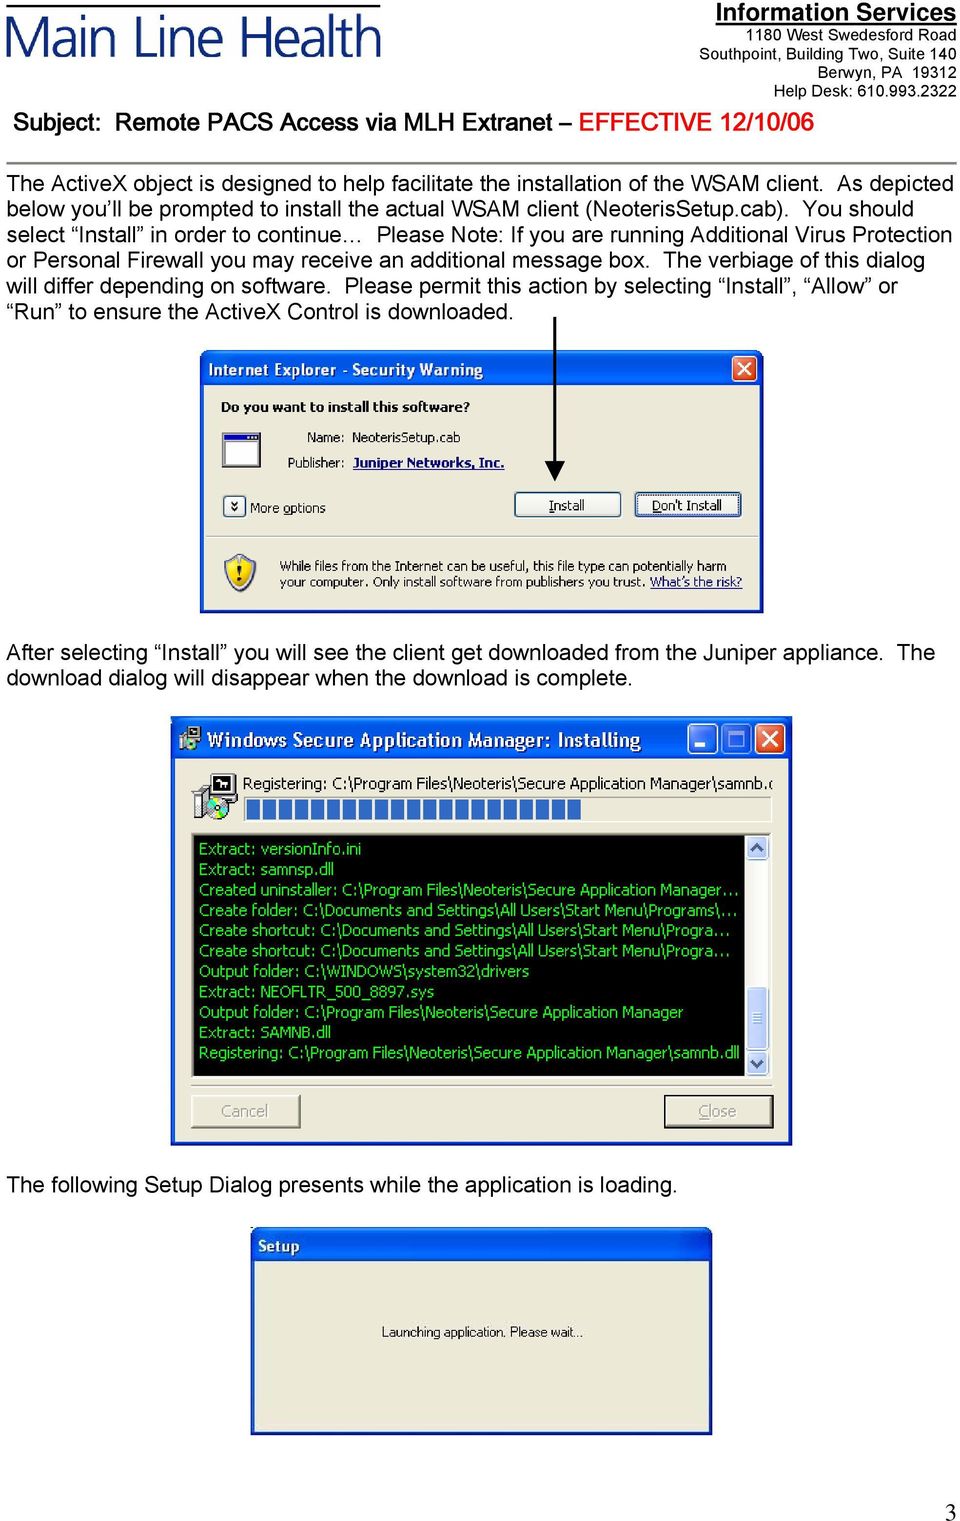 The verbiage of this dialog will differ depending on software. Please permit this action by selecting Install, Allow or Run to ensure the ActiveX Control is downloaded.